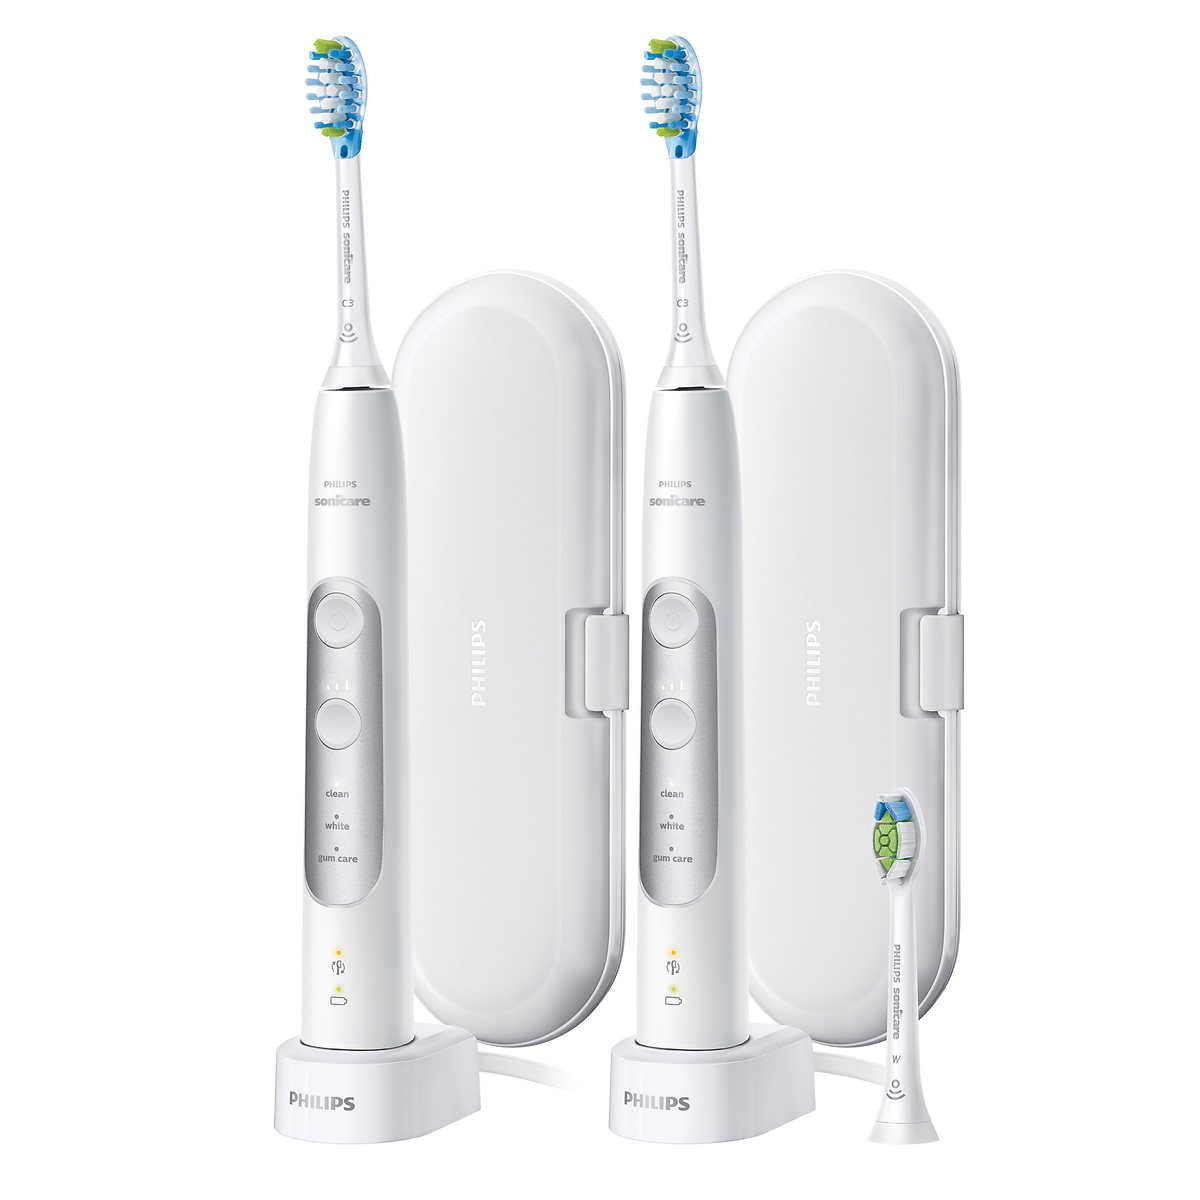 philips-hx7533-01-2-pack-electric-toothbrush-110-220-240-volt-for